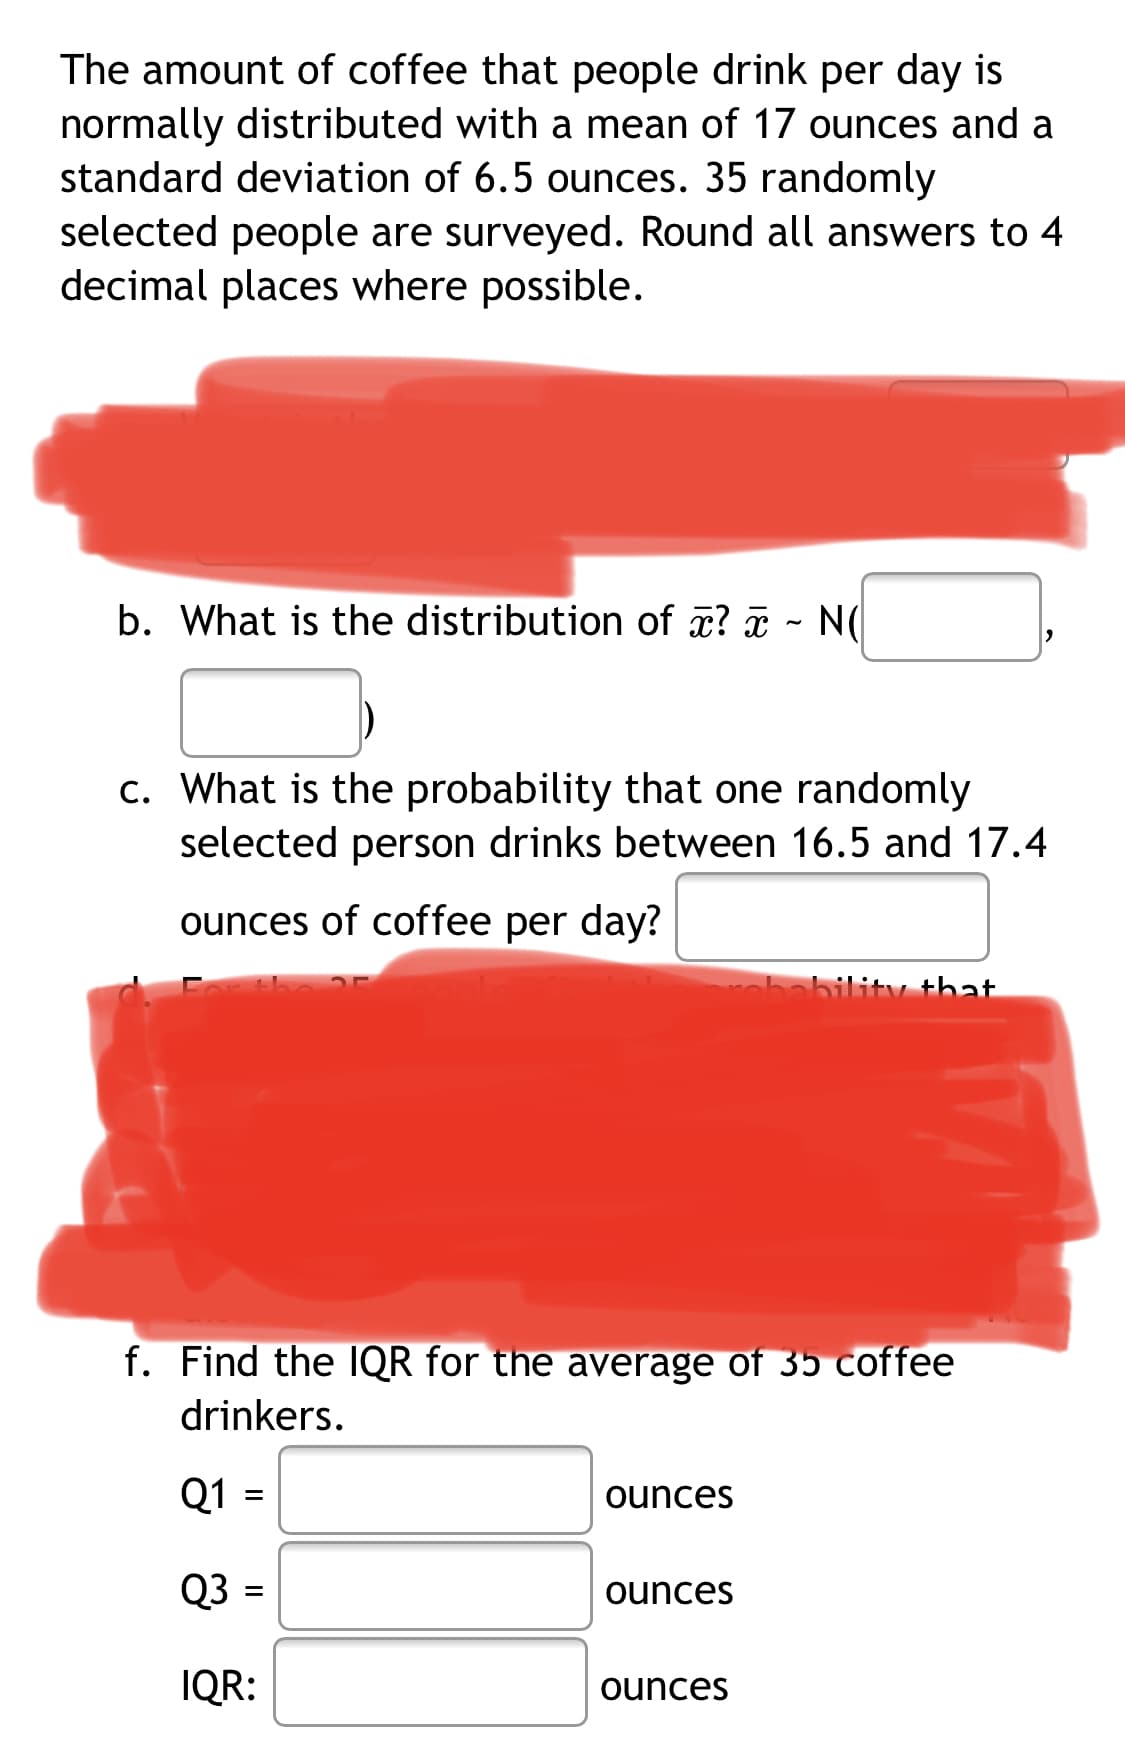 The amount of coffee that people drink per day is
normally distributed with a mean of 17 ounces and a
standard deviation of 6.5 ounces. 35 randomly
selected people are surveyed. Round all answers to 4
decimal places where possible.
b. What is the distribution of æ? ã - N(
c. What is the probability that one randomly
selected person drinks between 16.5 and 17.4
ounces of coffee per day?
obability that
f. Find the IQR for the average of 35 coffee
drinkers.
Q1
ounces
Q3
ounces
IQR:
ounces
